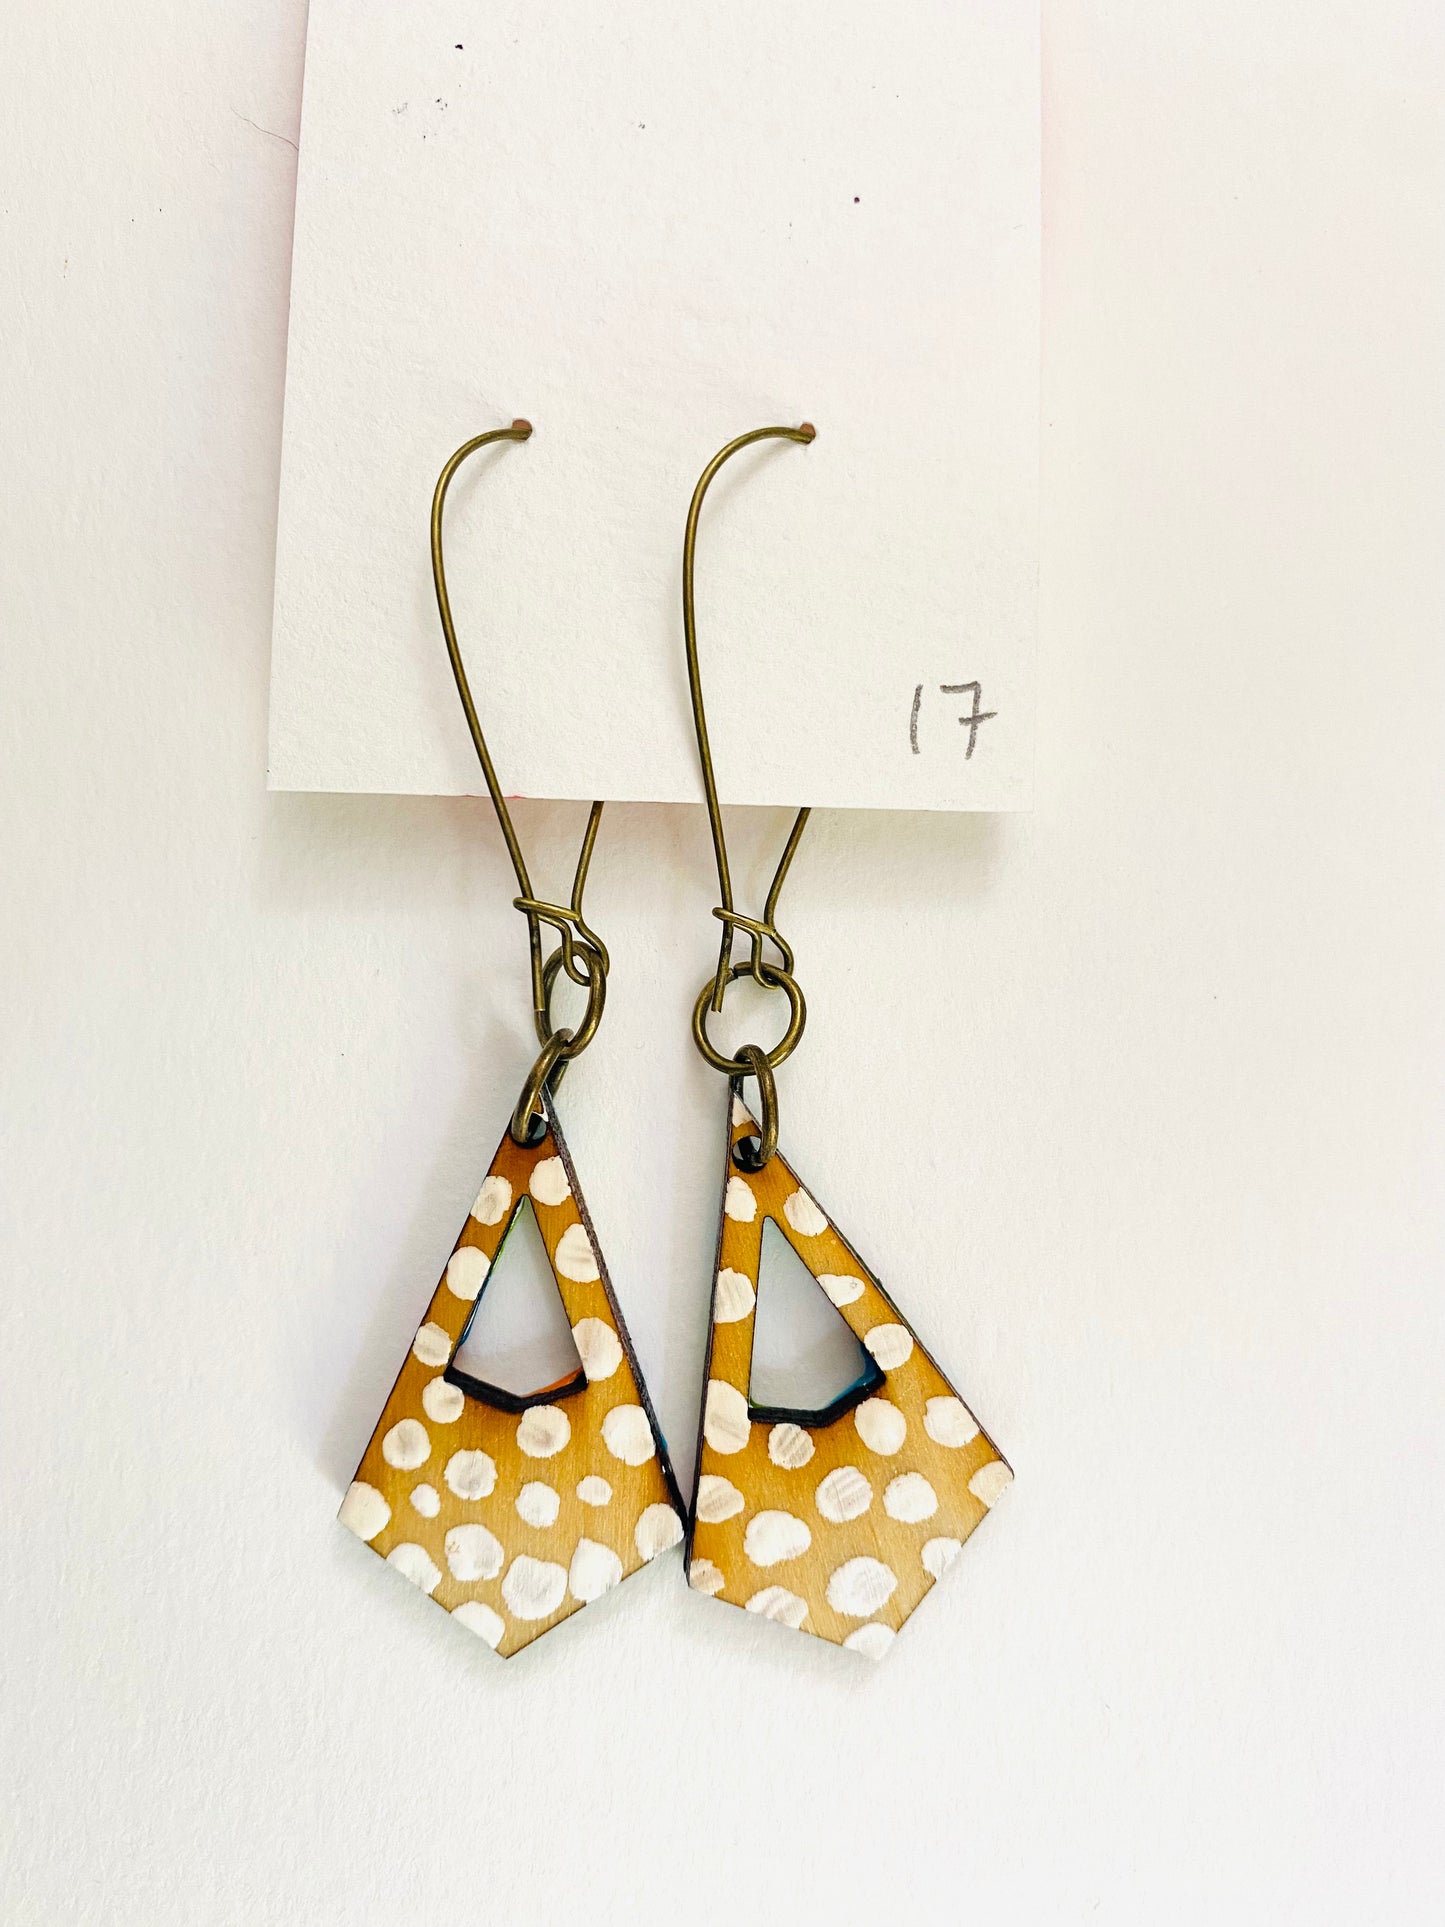 Colorful, Hand Painted, Geometric Shaped Earrings 17